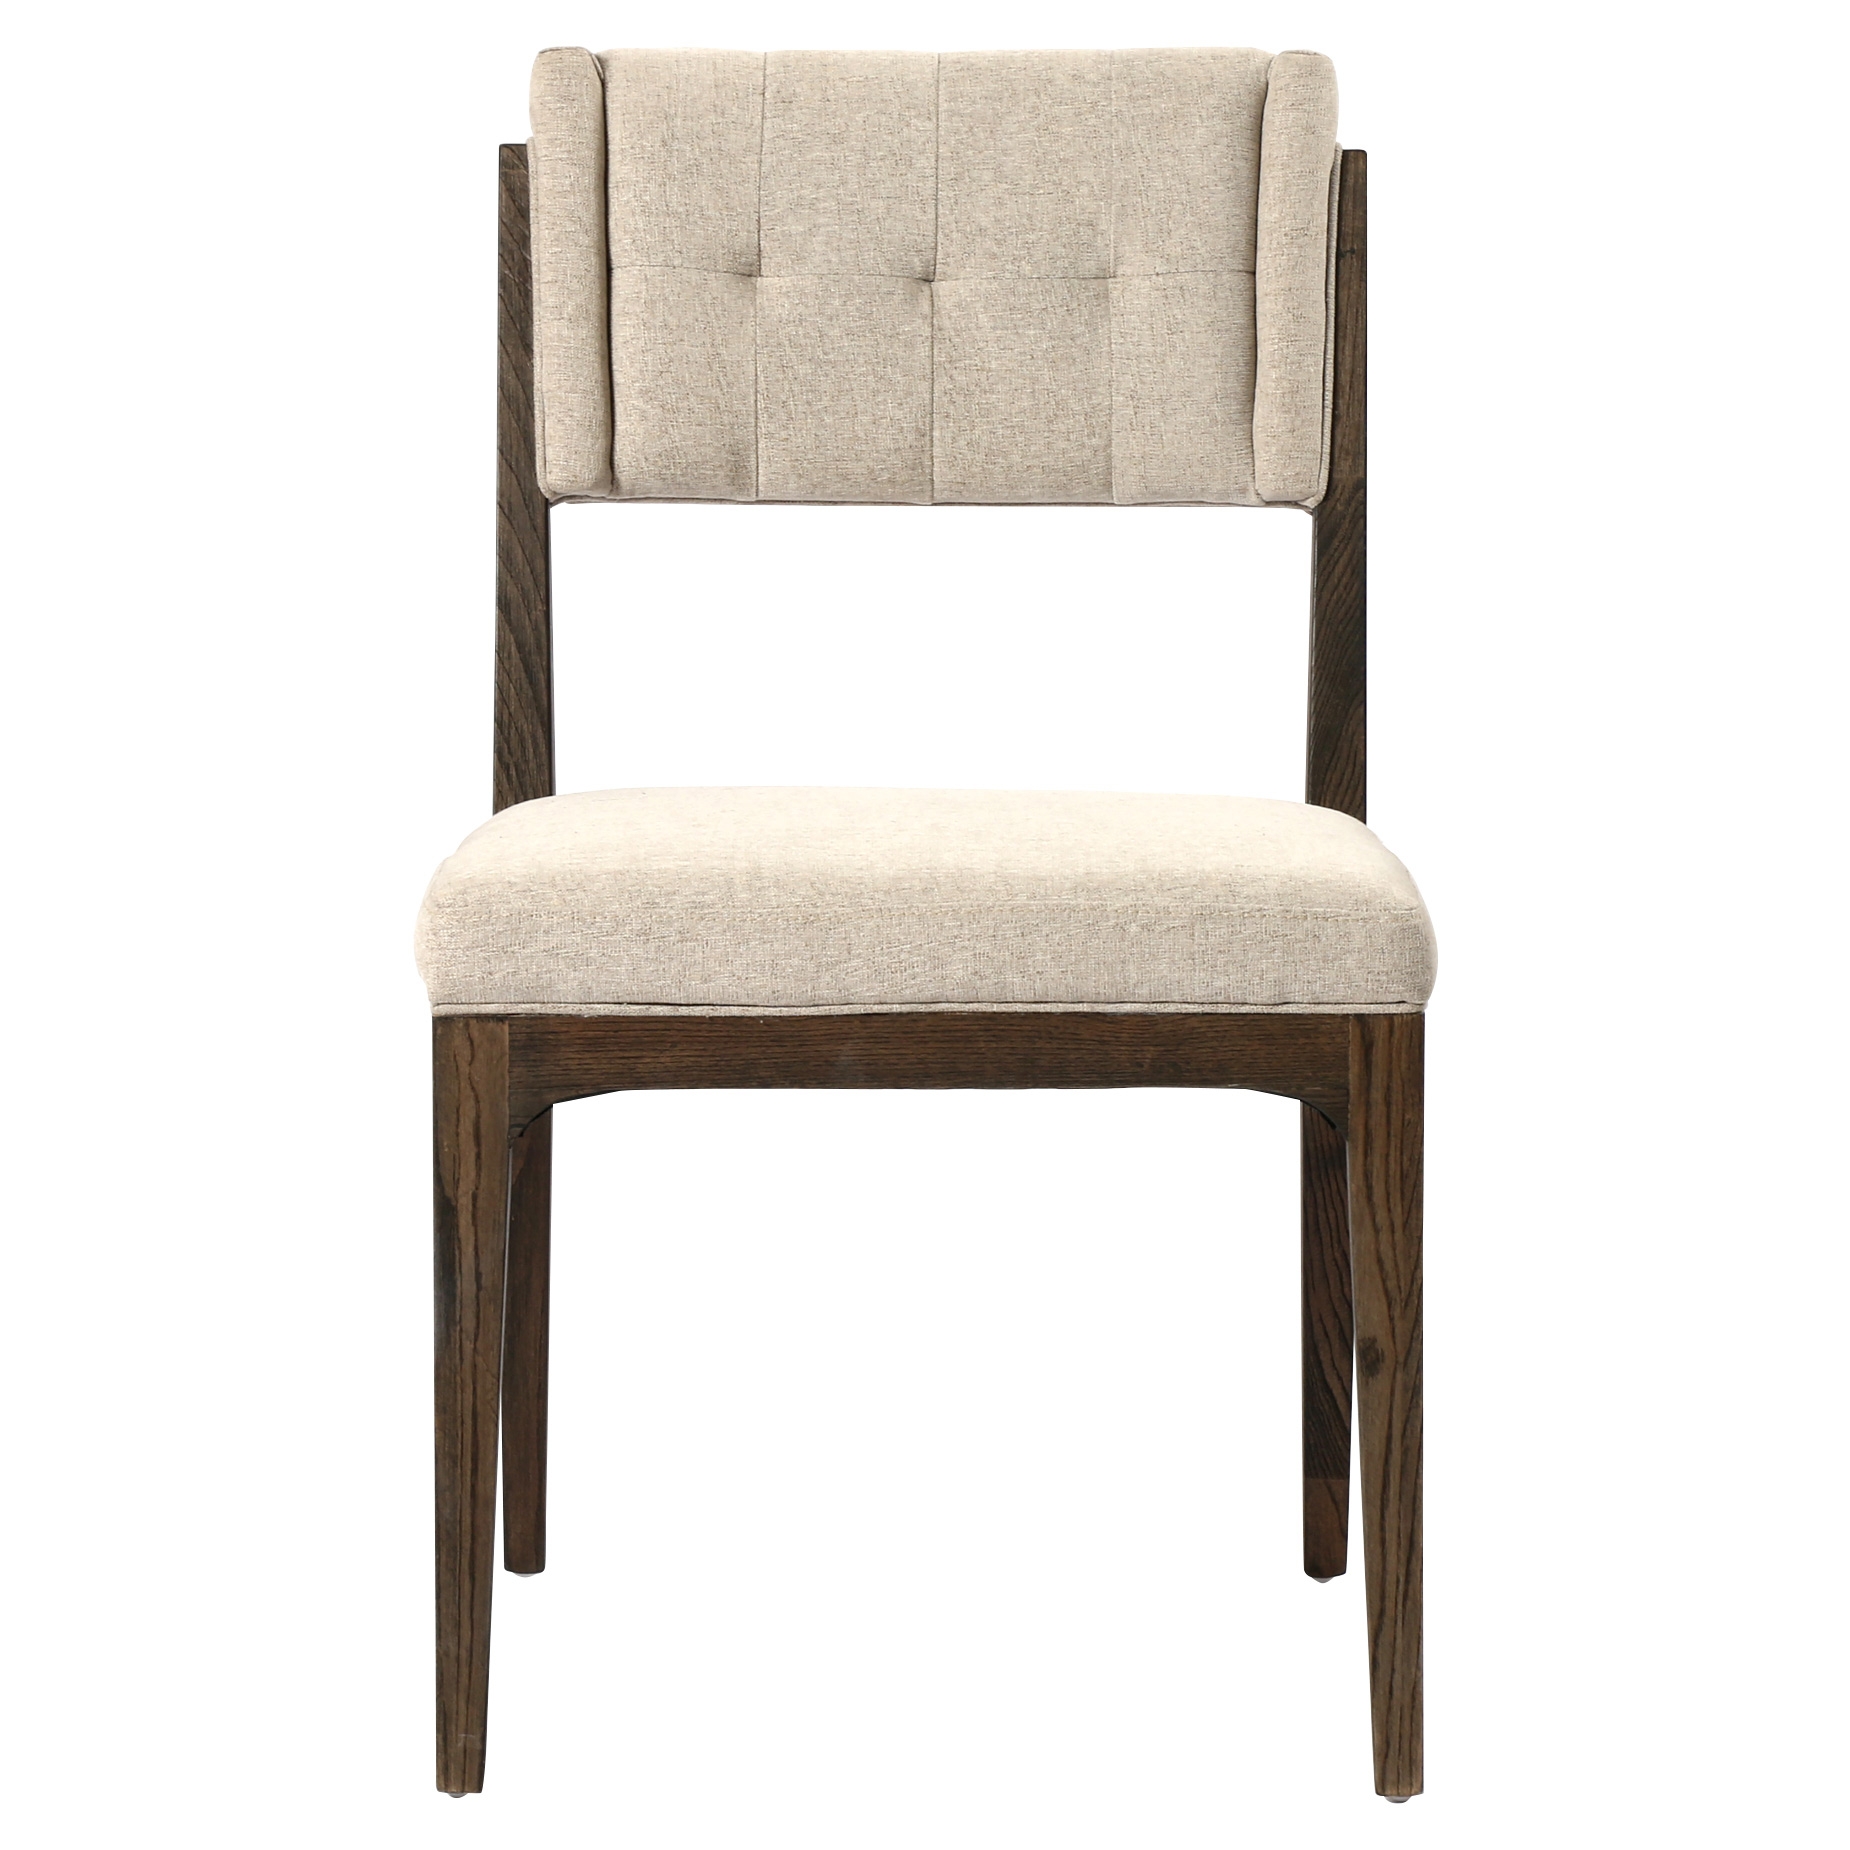 Arlene French Country Tuffed Beige Linen Upholstered Wood Dining Chair - Image 1